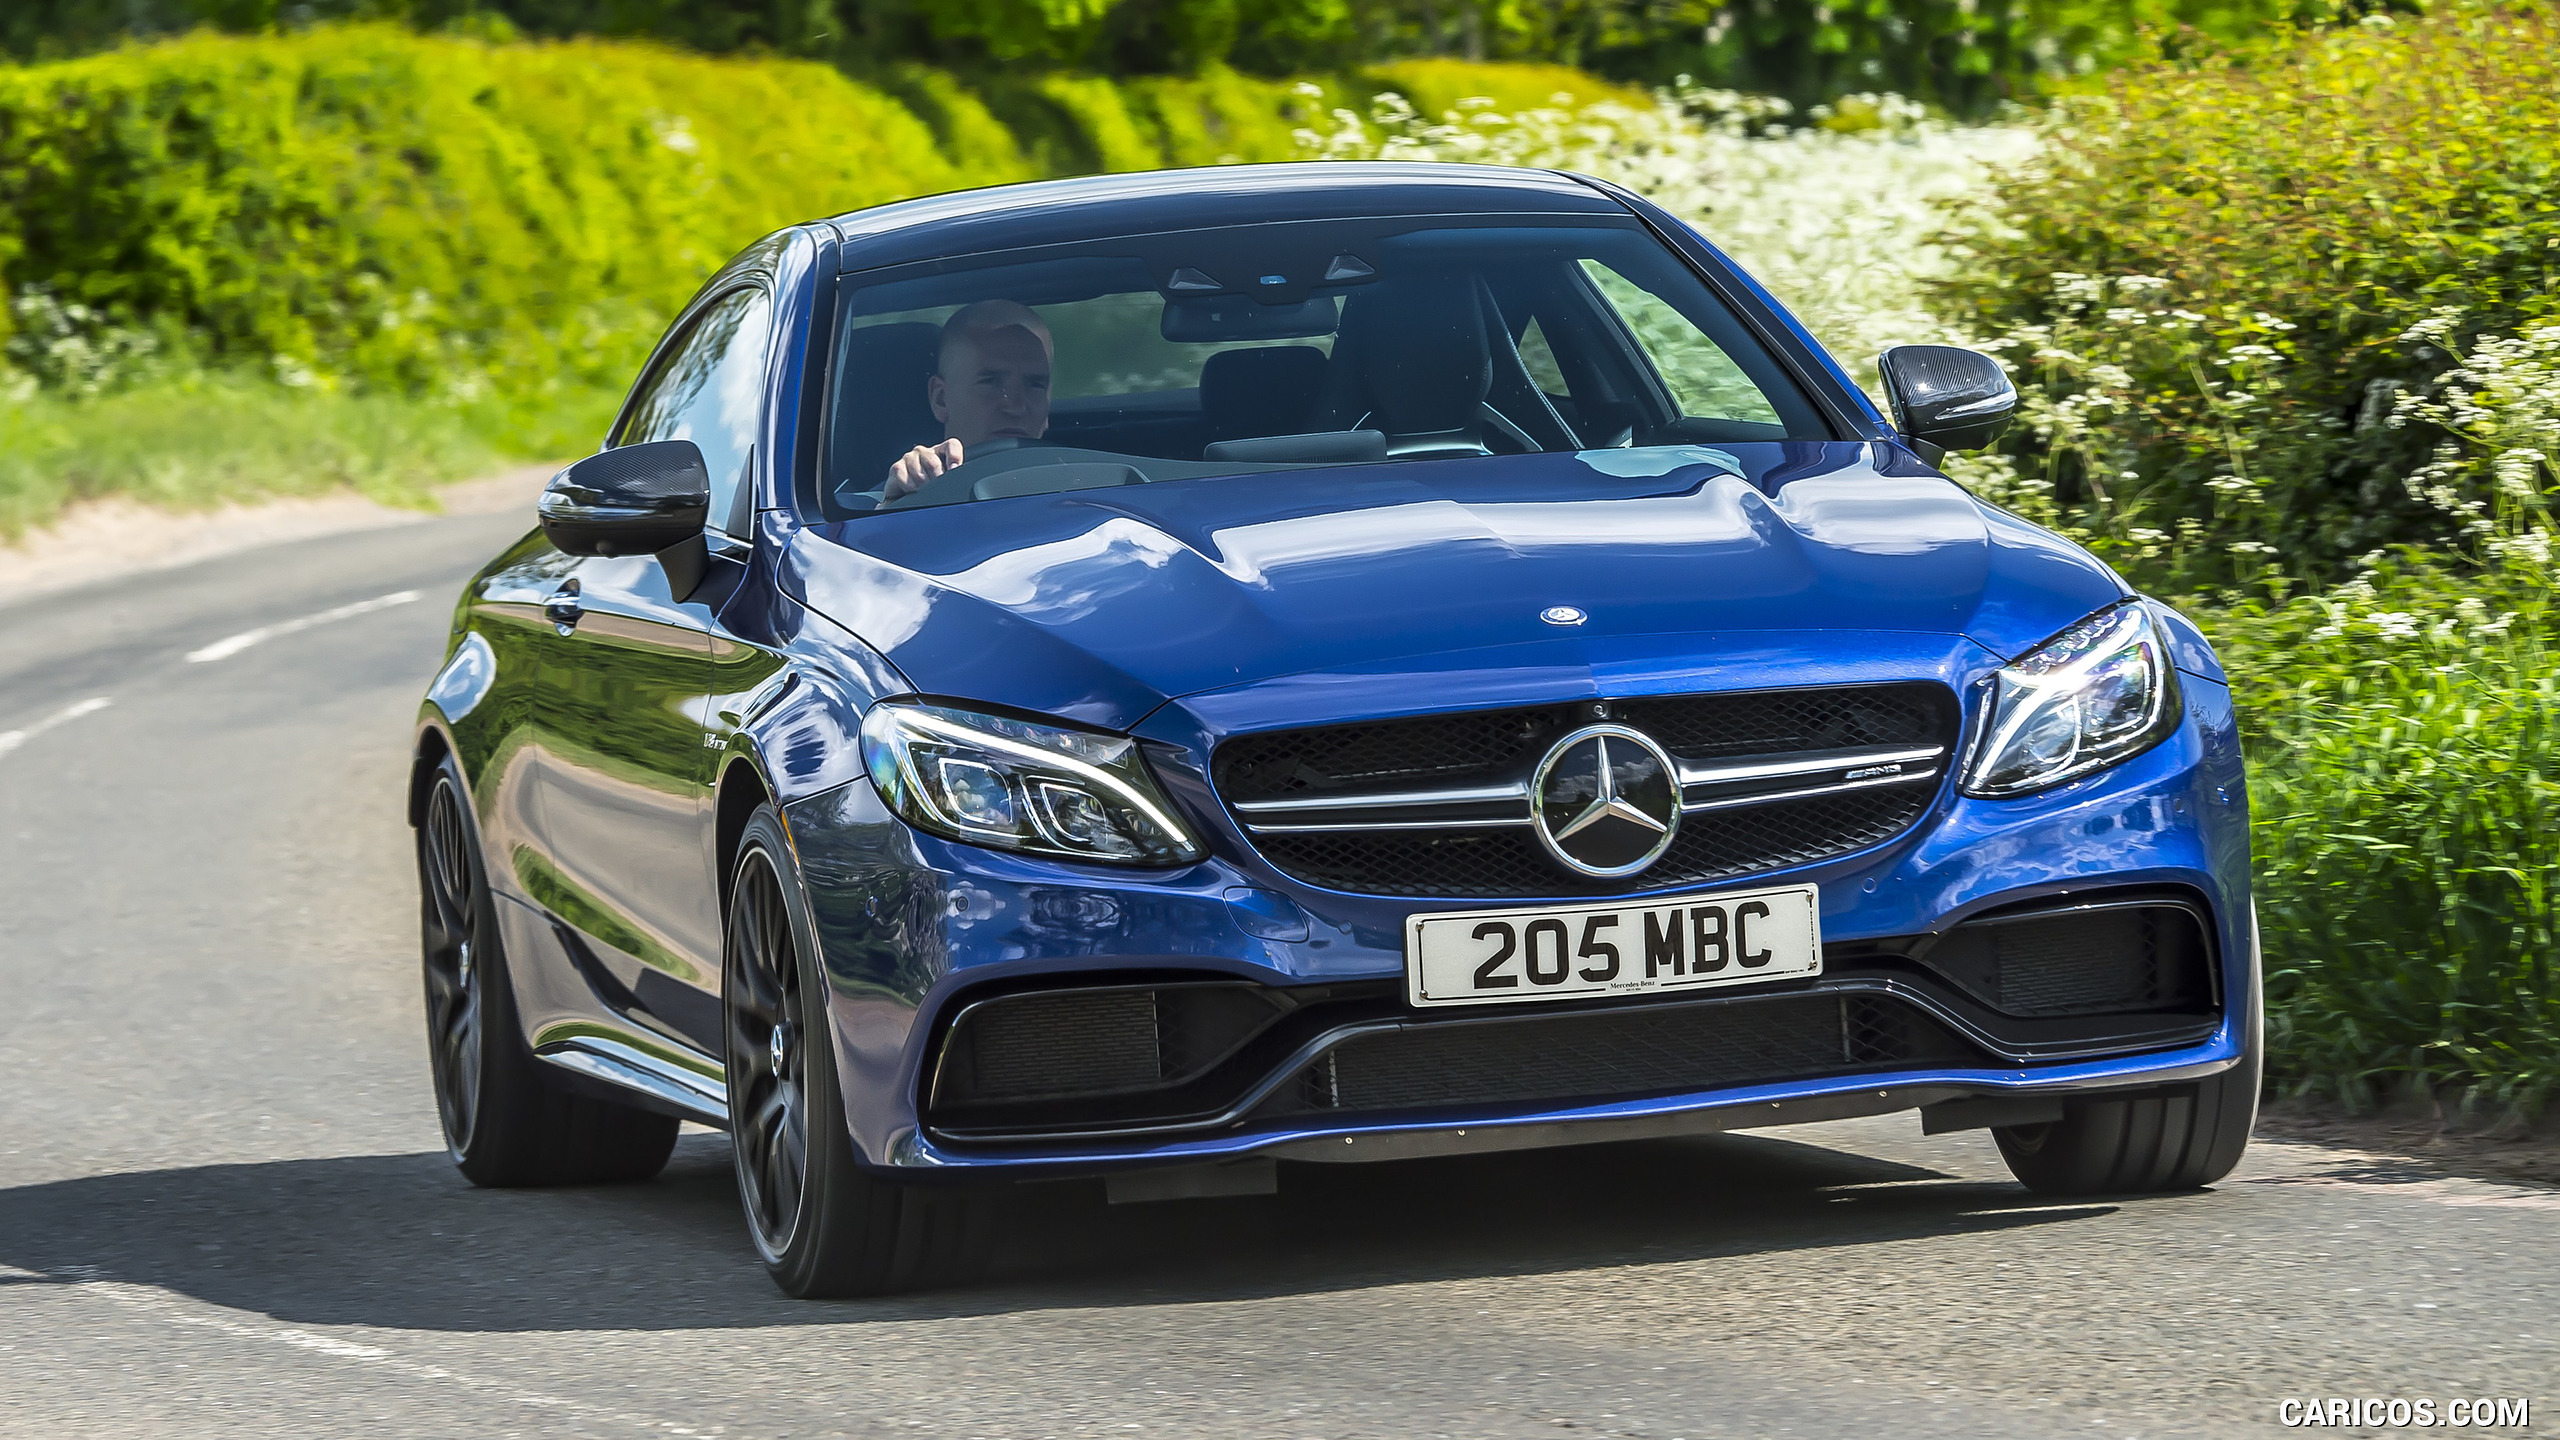 2017 Mercedes-AMG C63 S Coupe (UK-Spec) - Front, #1 of 52